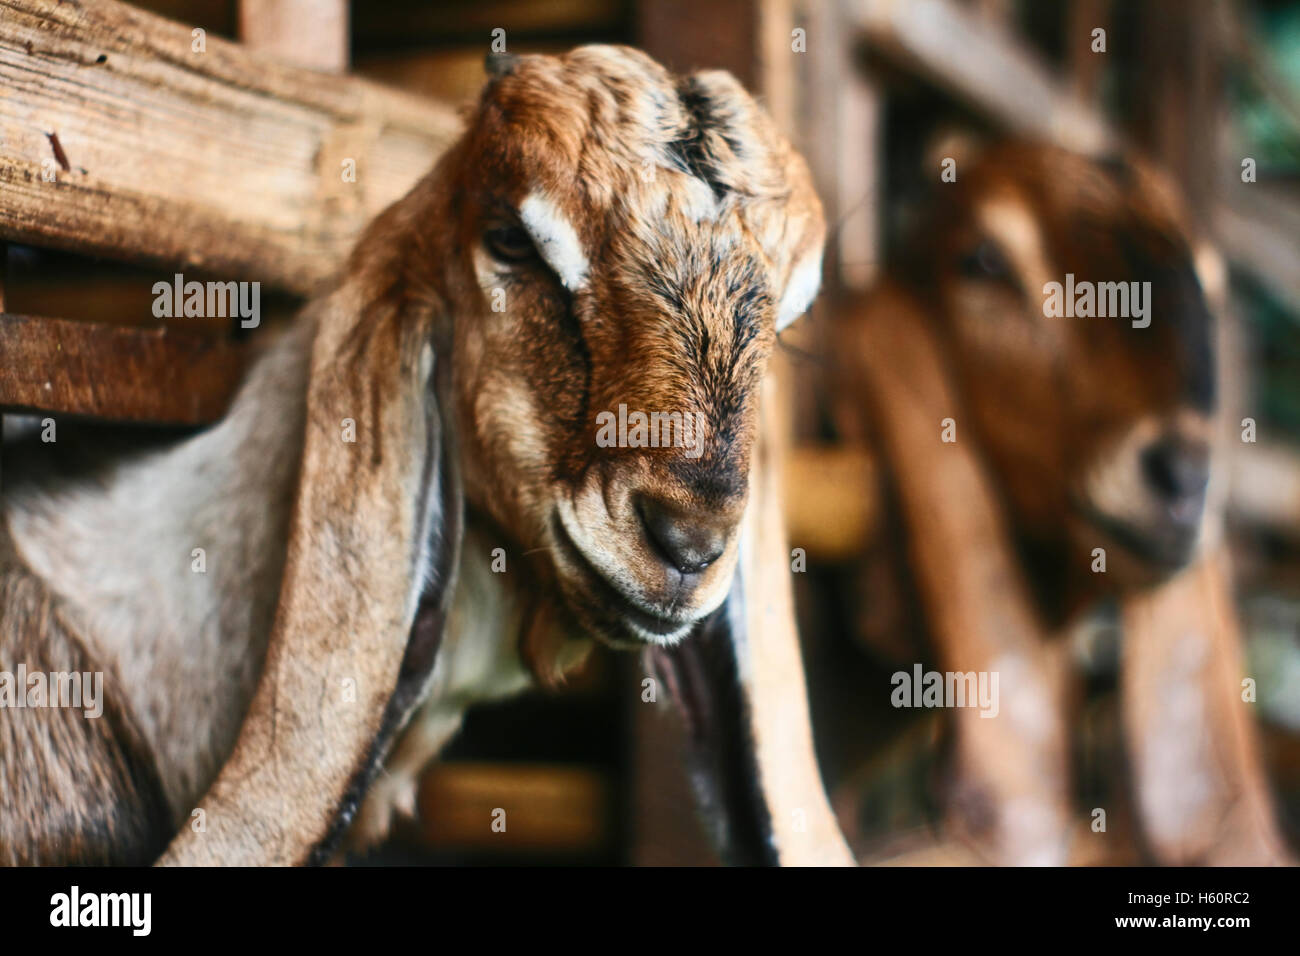 Goat in the cage Stock Photo